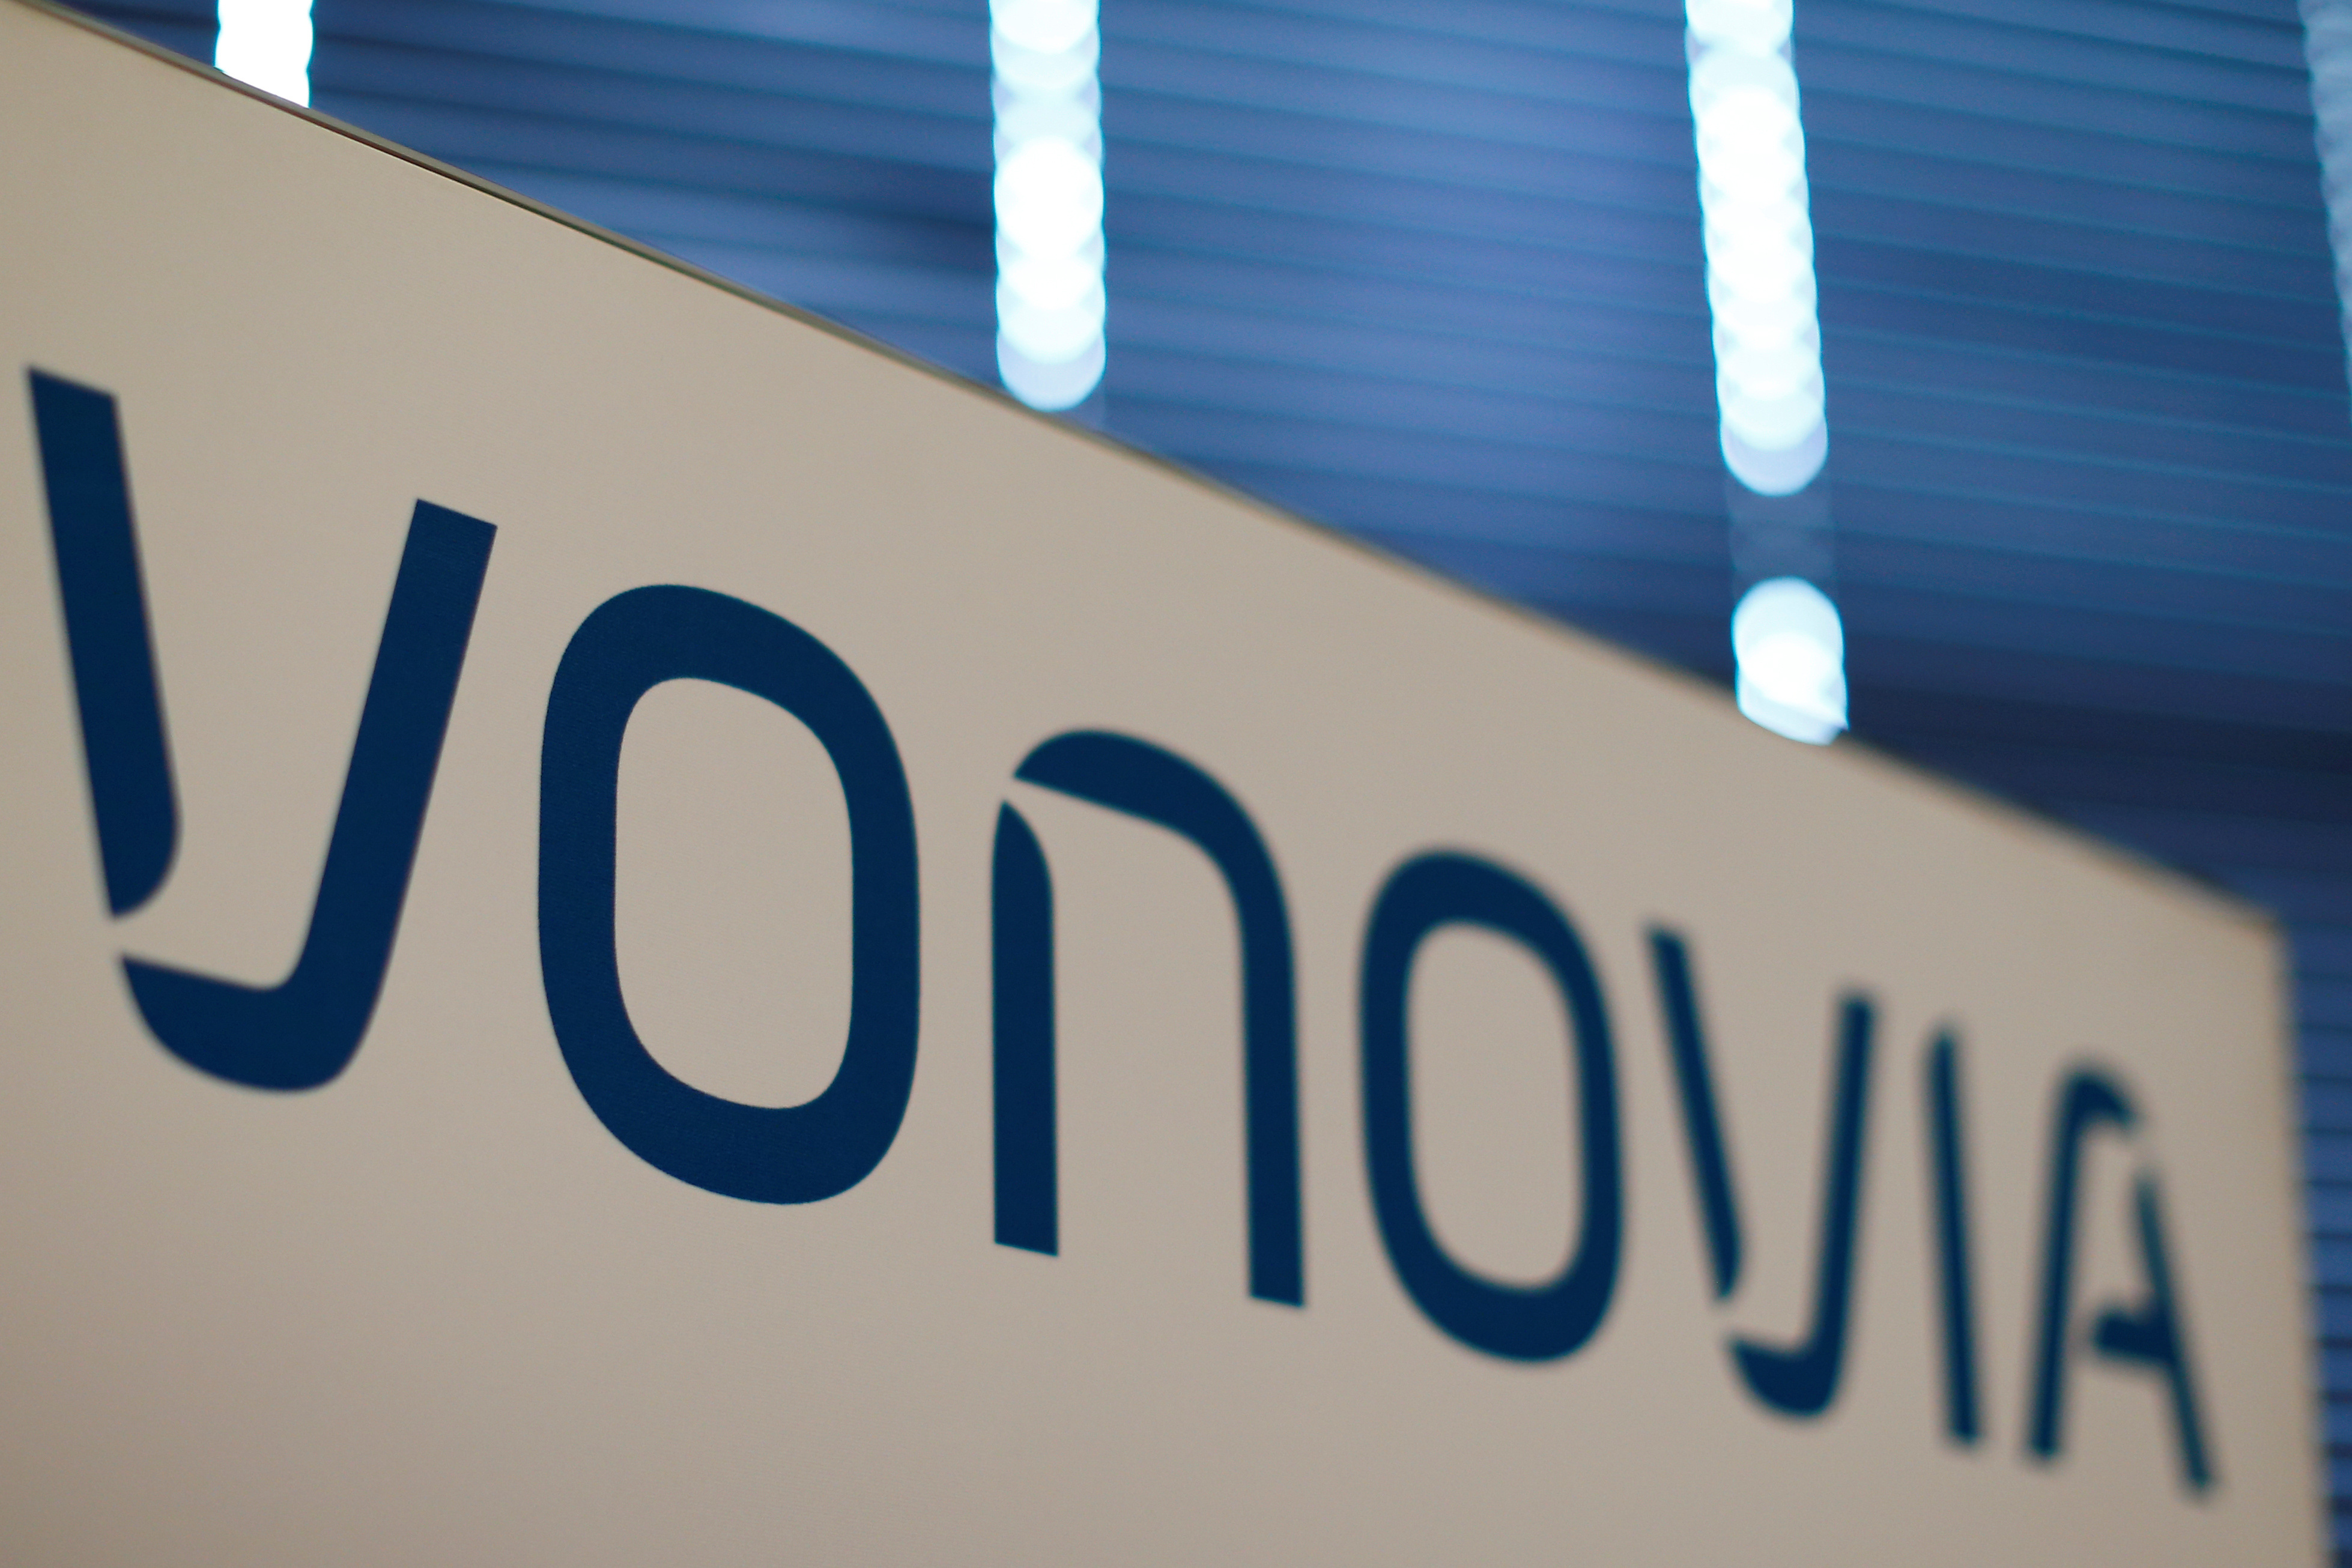 A logo of German real estate company Vonovia, is pictured during a news conference in Duesseldorf